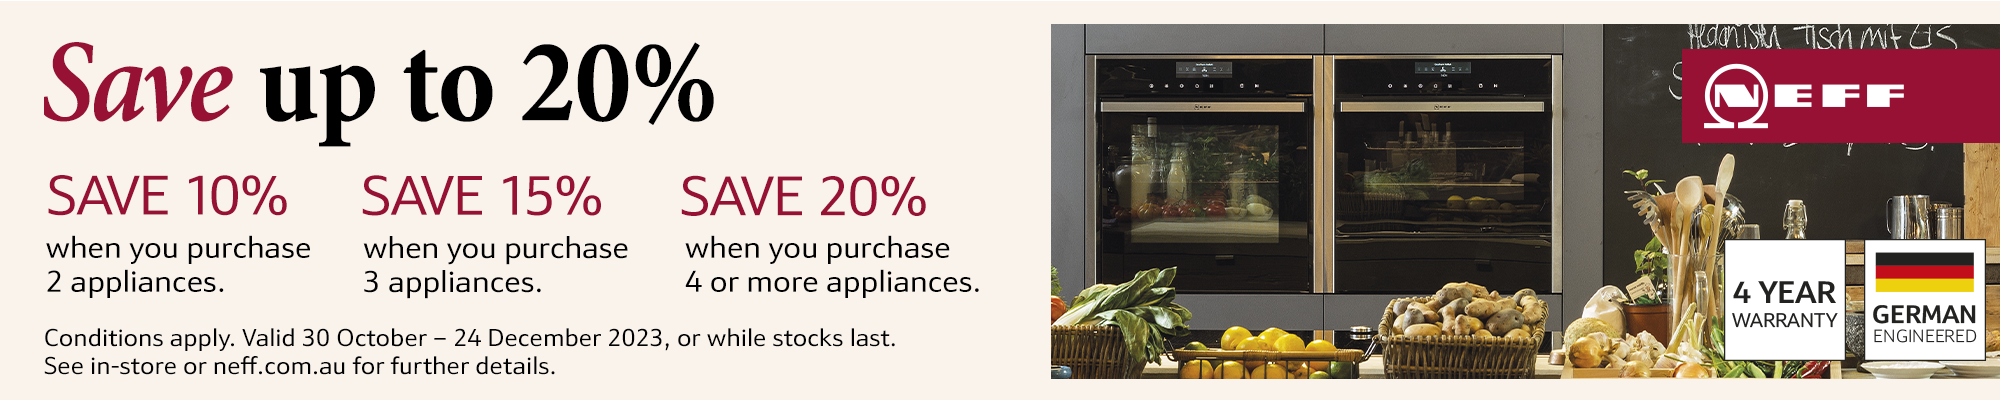 Save Up To 20% On Neff Kitchen Packages